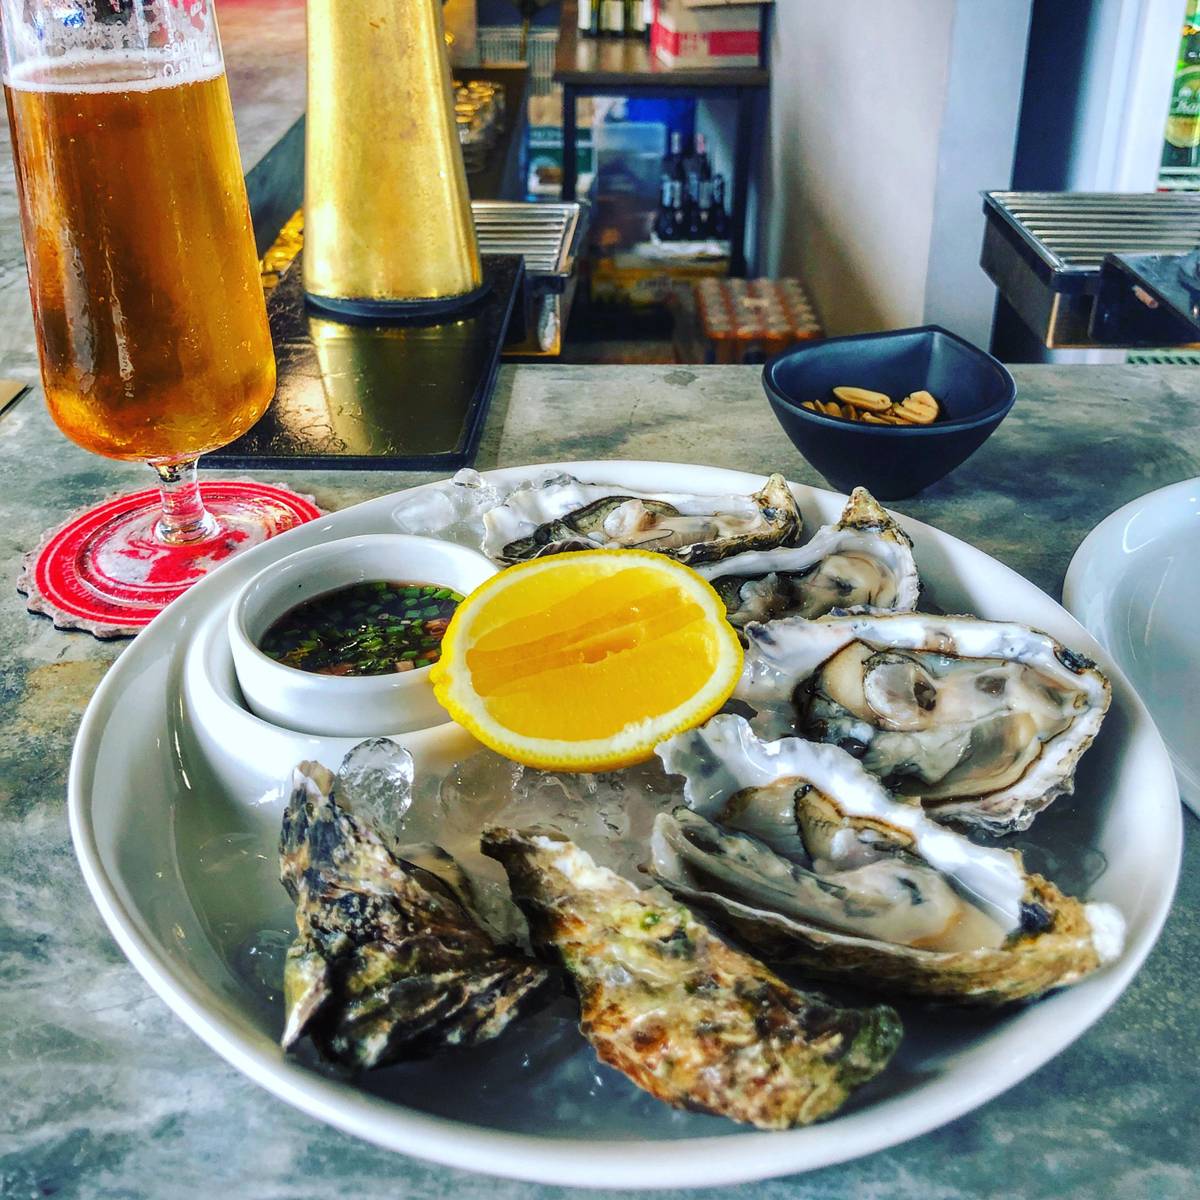 Who loves oysters?